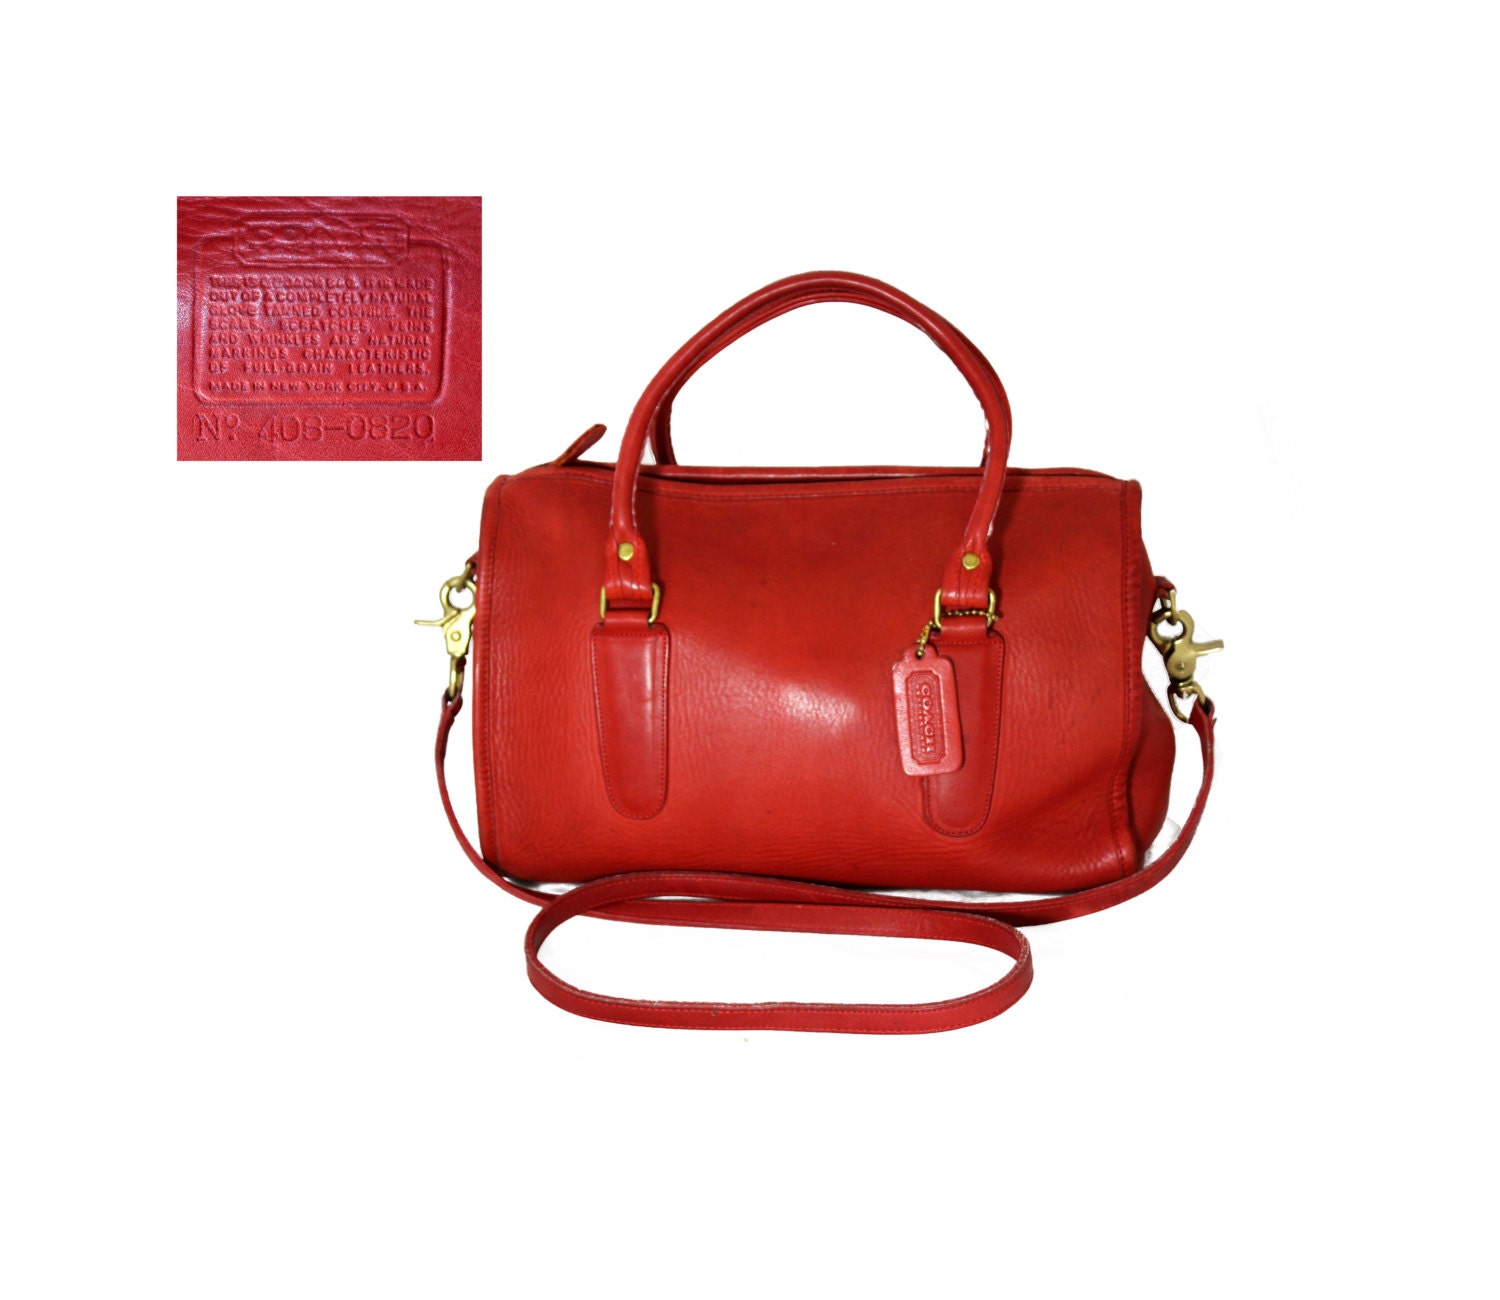 COACH Red Speedy Bag / Boston Bag / Doctors Bag NYC with Strap